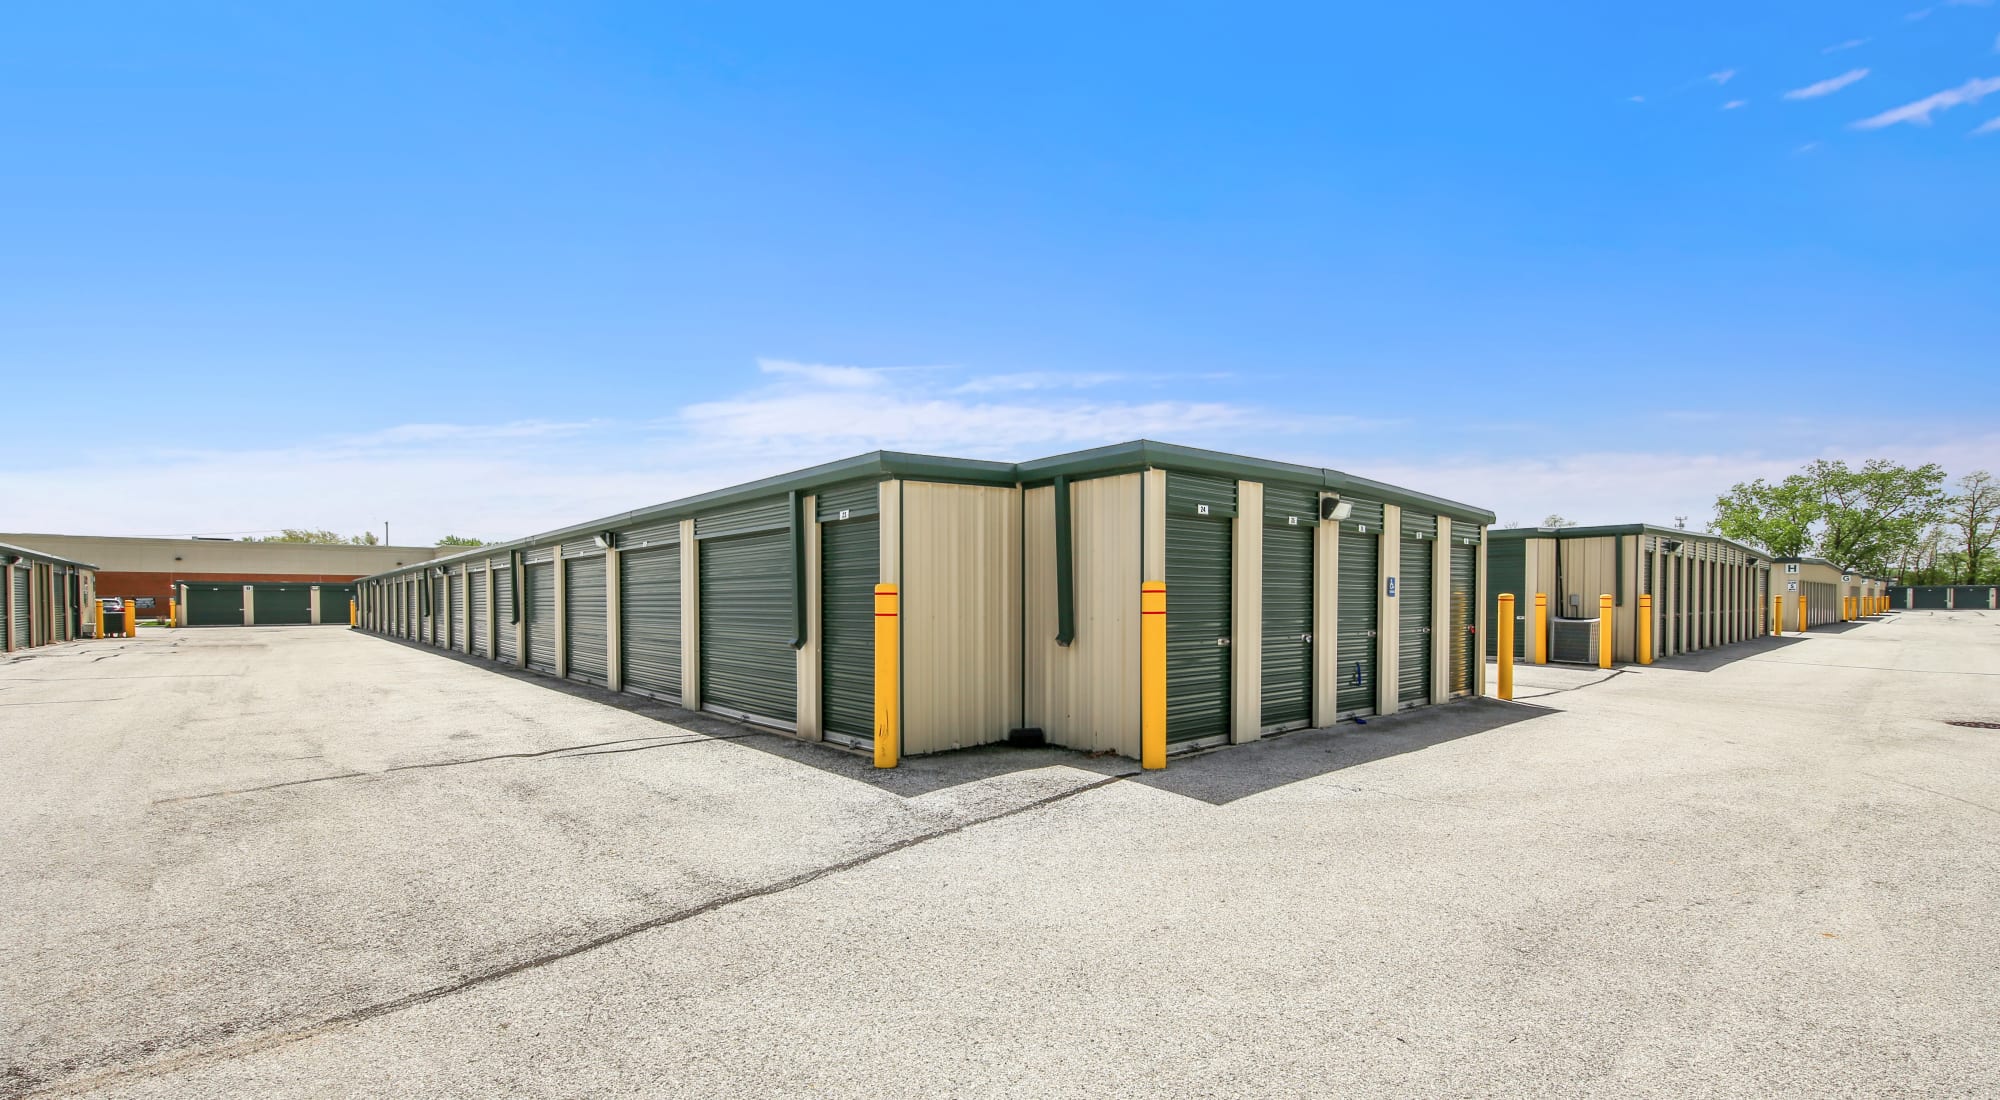 How a CMMS Benefits Self-Storage Companies